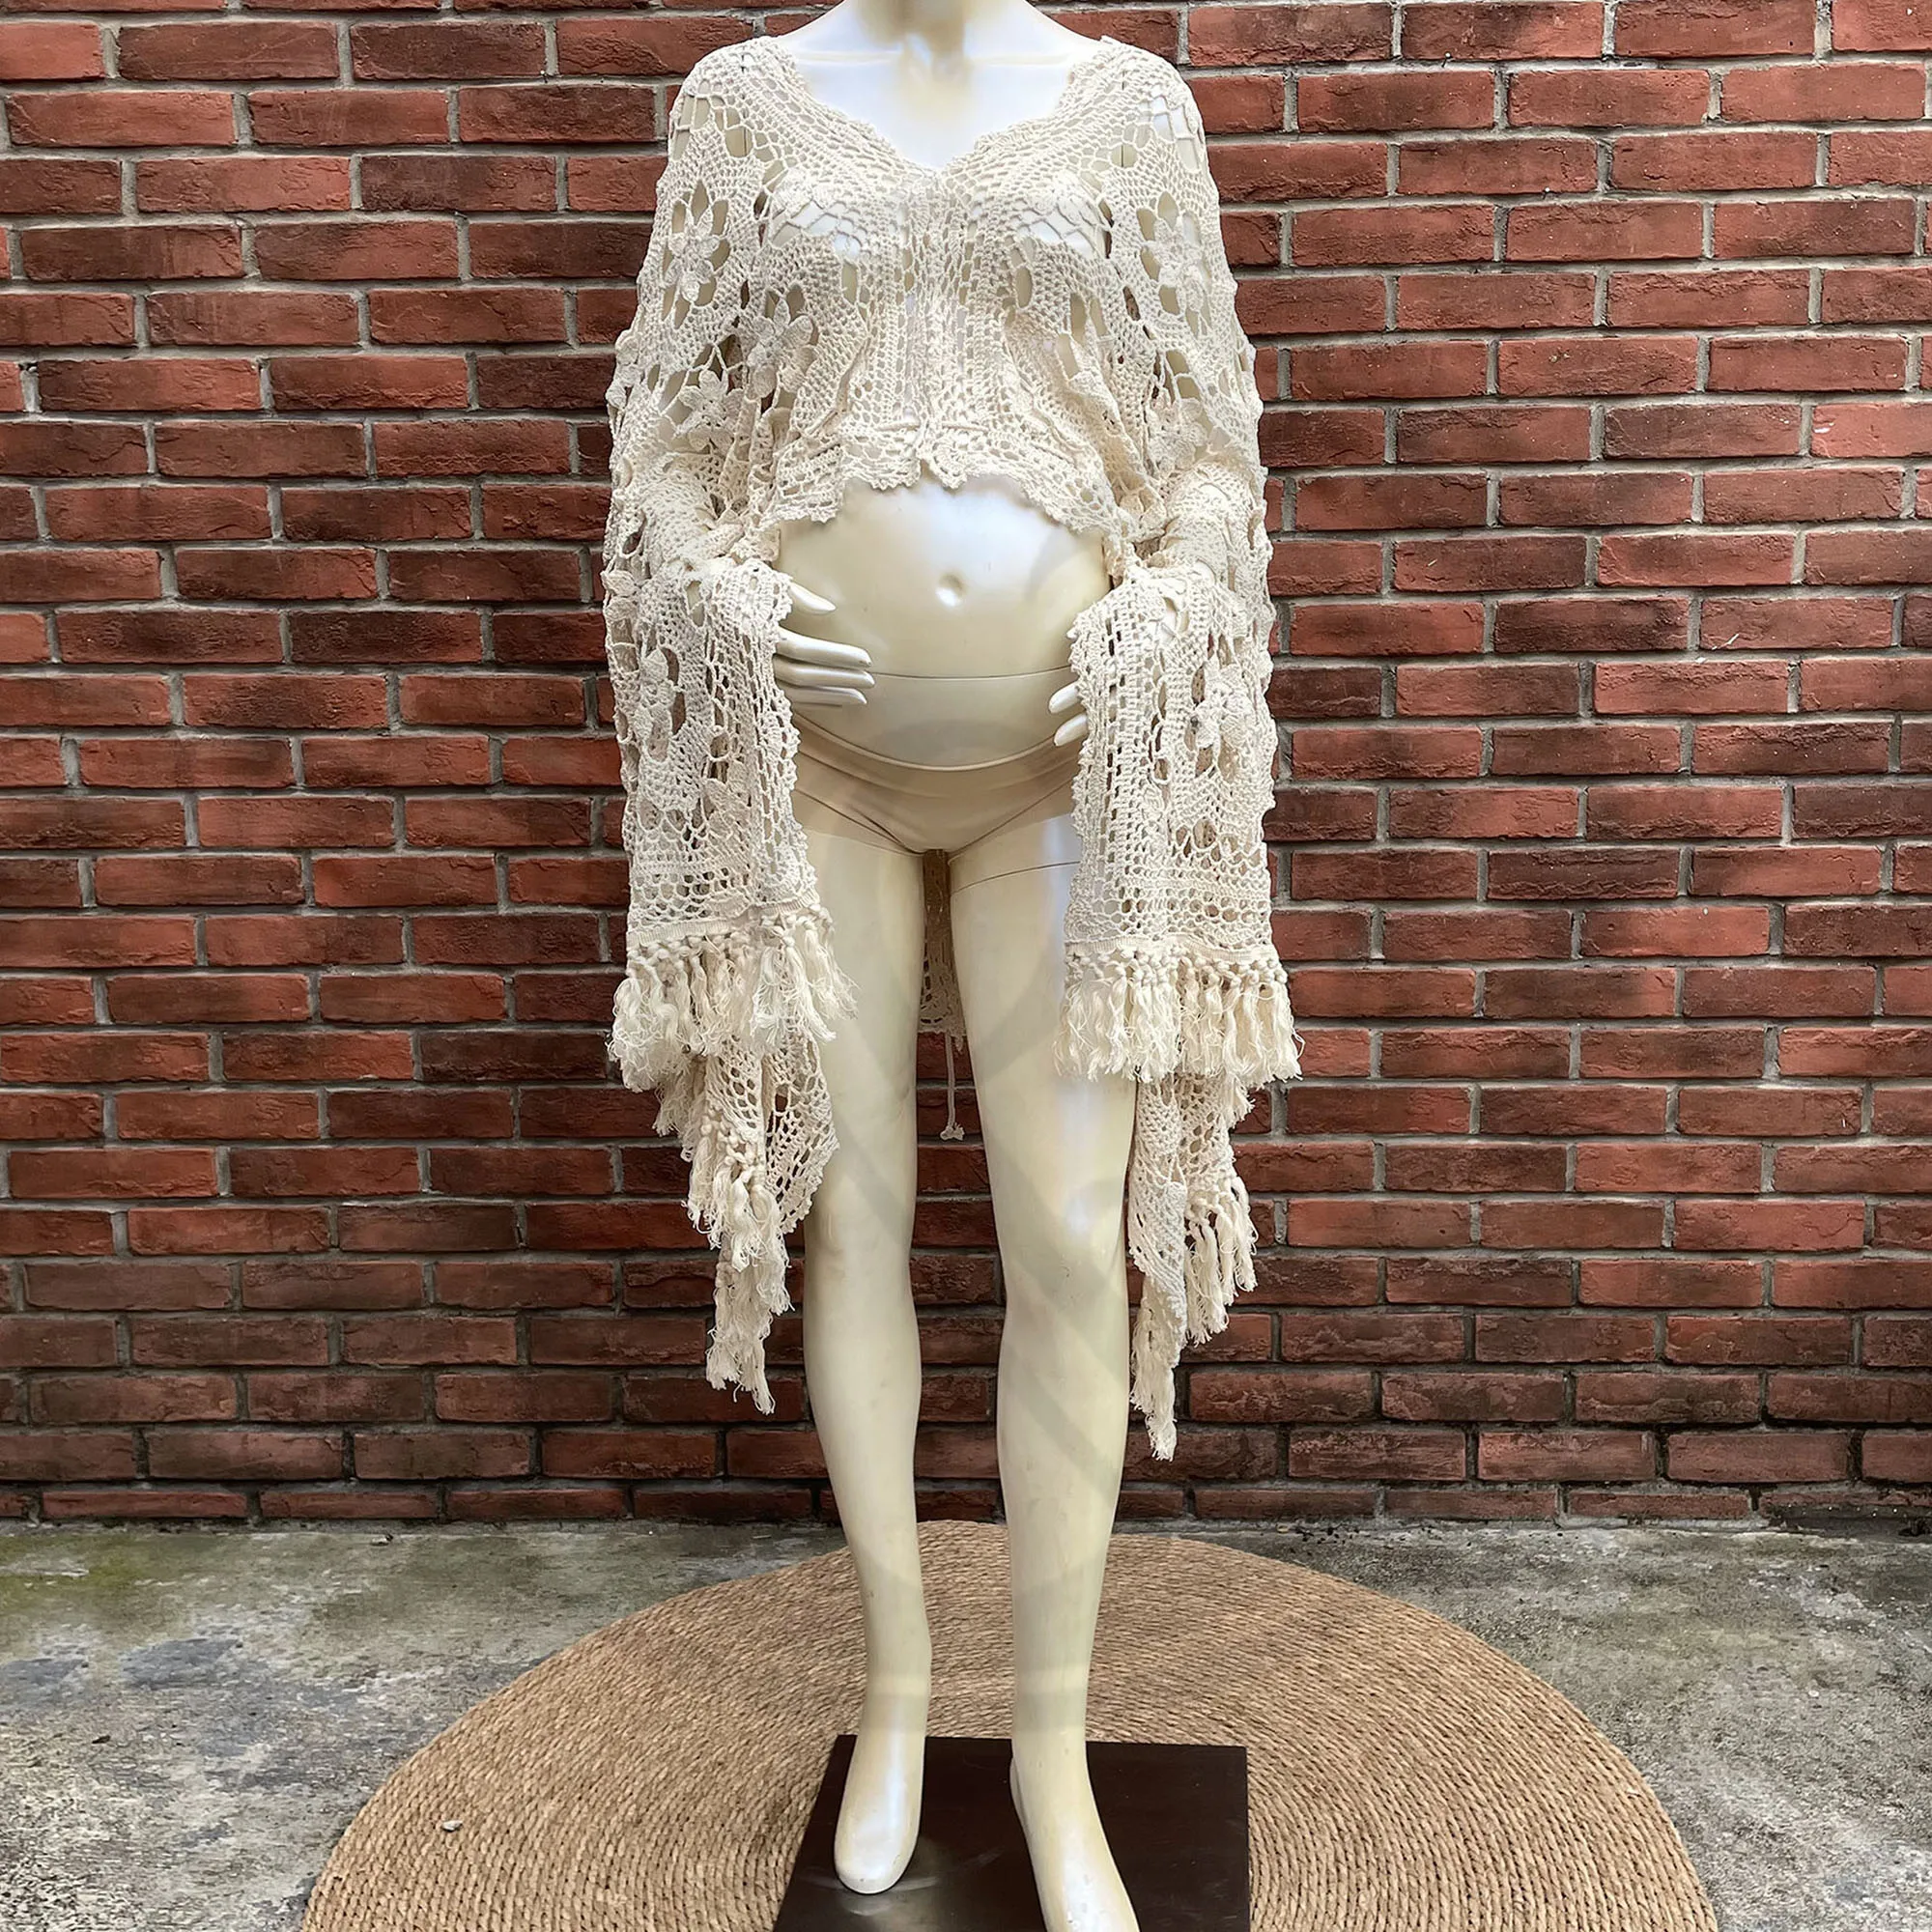 Photo Shoot Extra Long Floral Pregnant Handcraft Crochet Shawl with Tassel Handmade Cotton Beige Cape for Women Photography Prop